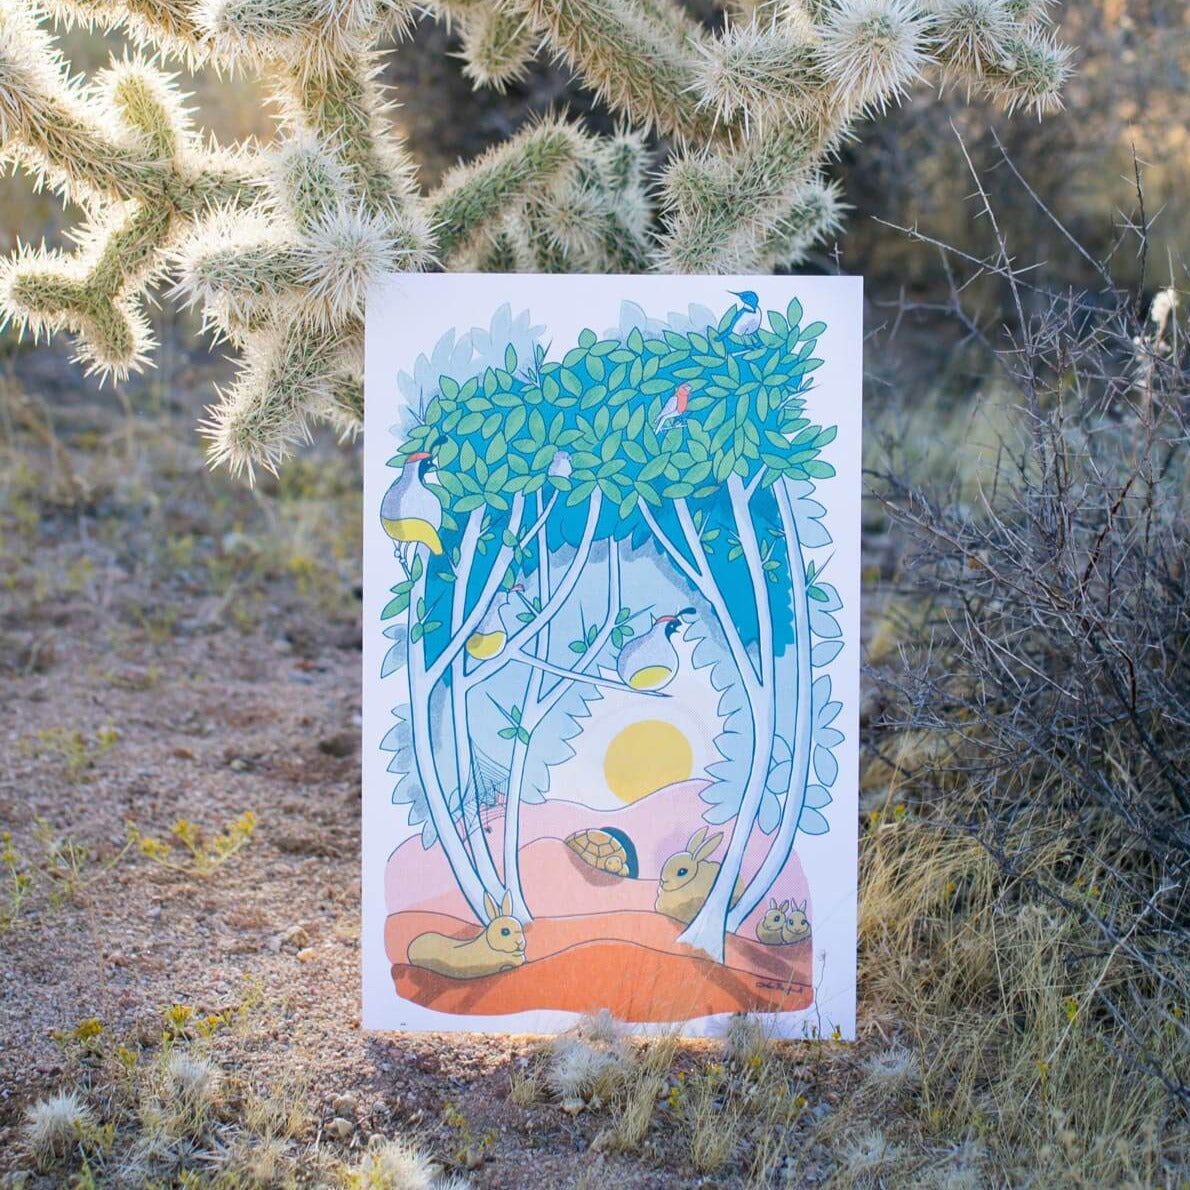 This 11"x17" print of animal characters found in a graythorn bush. Quail, cottontail bunnies, Western scrub jay, house finches, and a desert tortoise all hang out inside and underneath the branches of this bush. A sun can be seen setting in the background through an opening in the branches. The print rests against a cholla cactus.